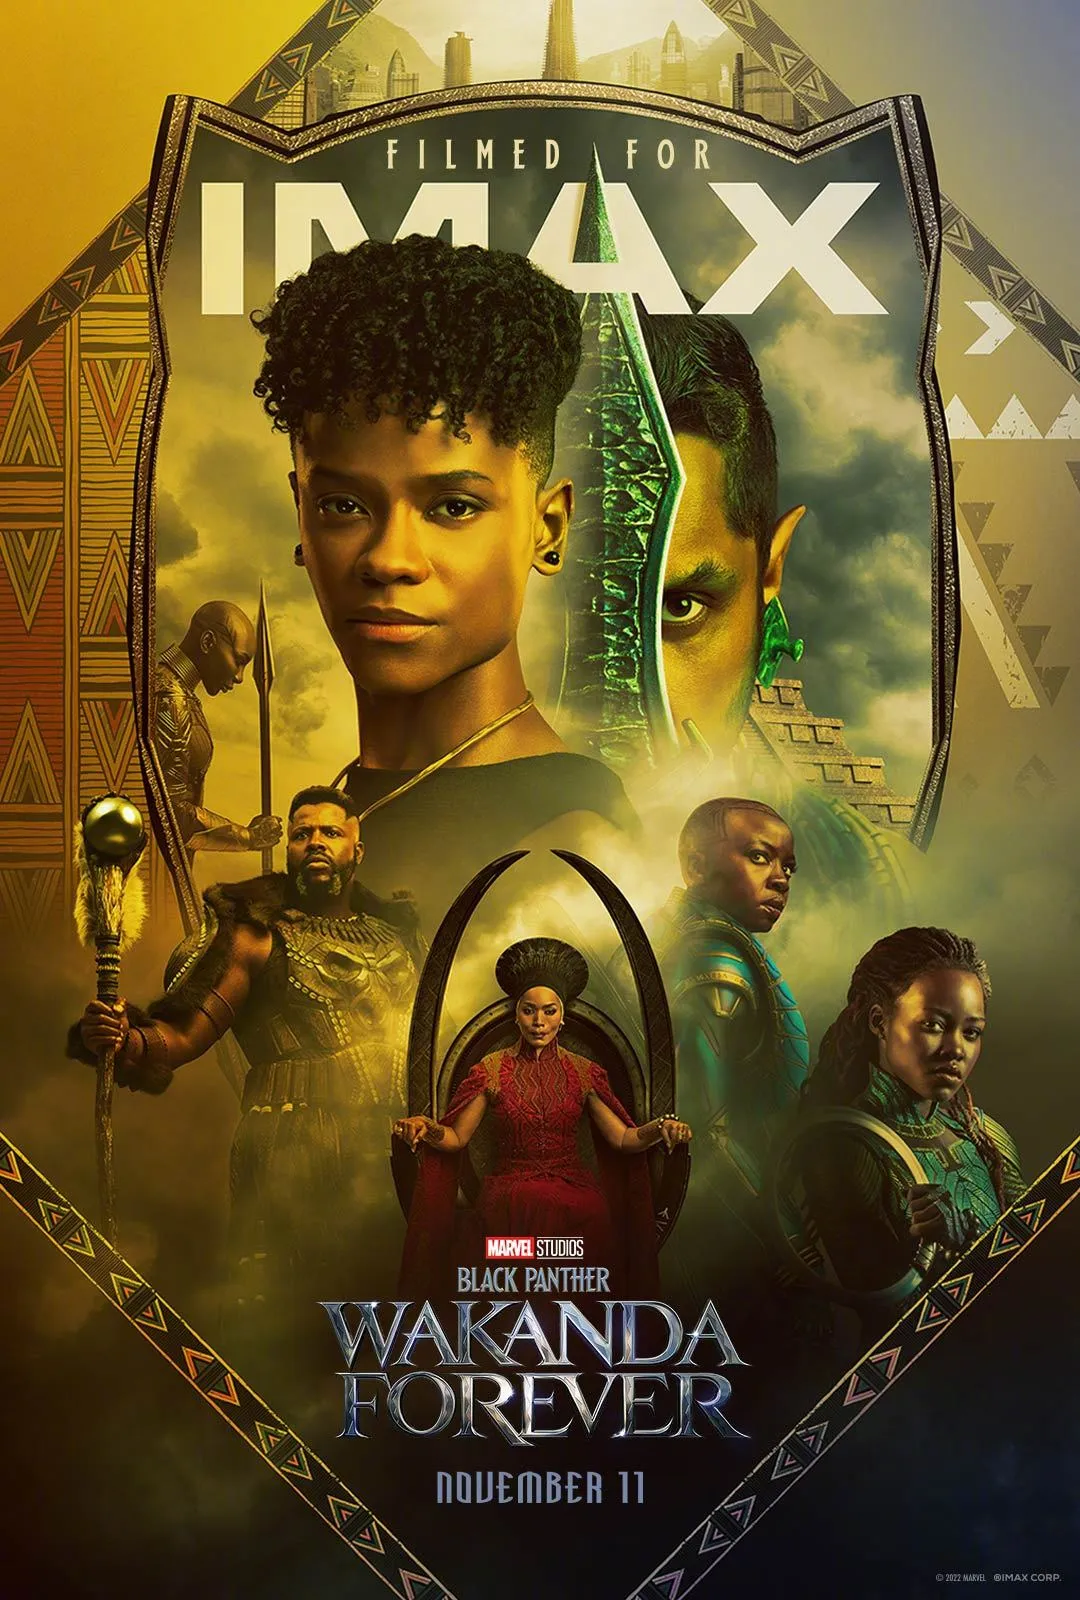 'Black Panther: Wakanda Forever' tops $400 million at global box office | FMV6